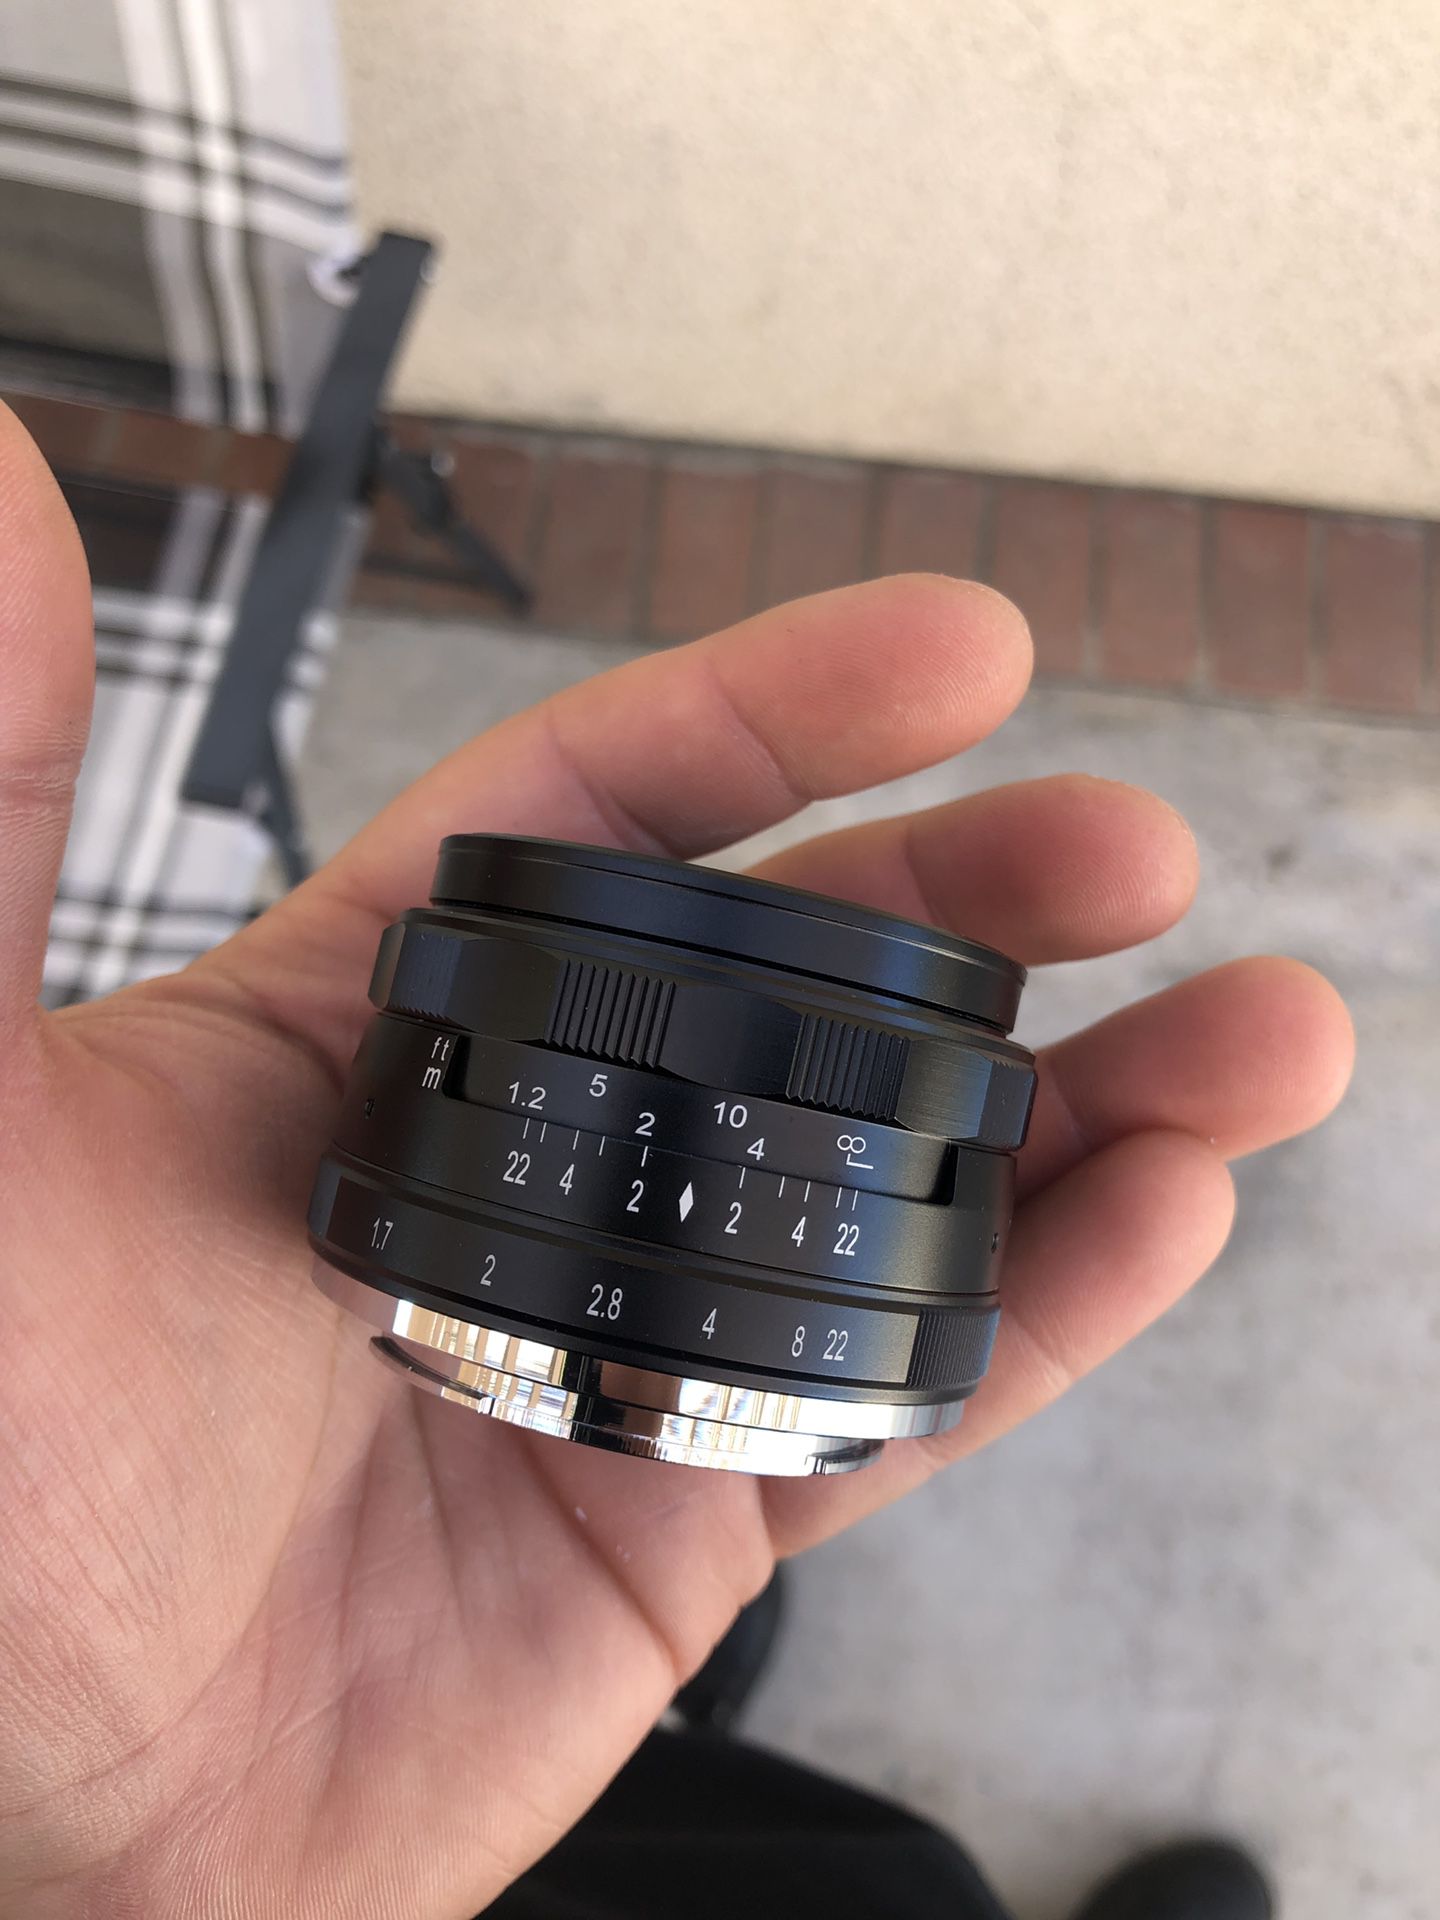 NEEWER 35mm LENS for SONY E-MOUNT Cameras